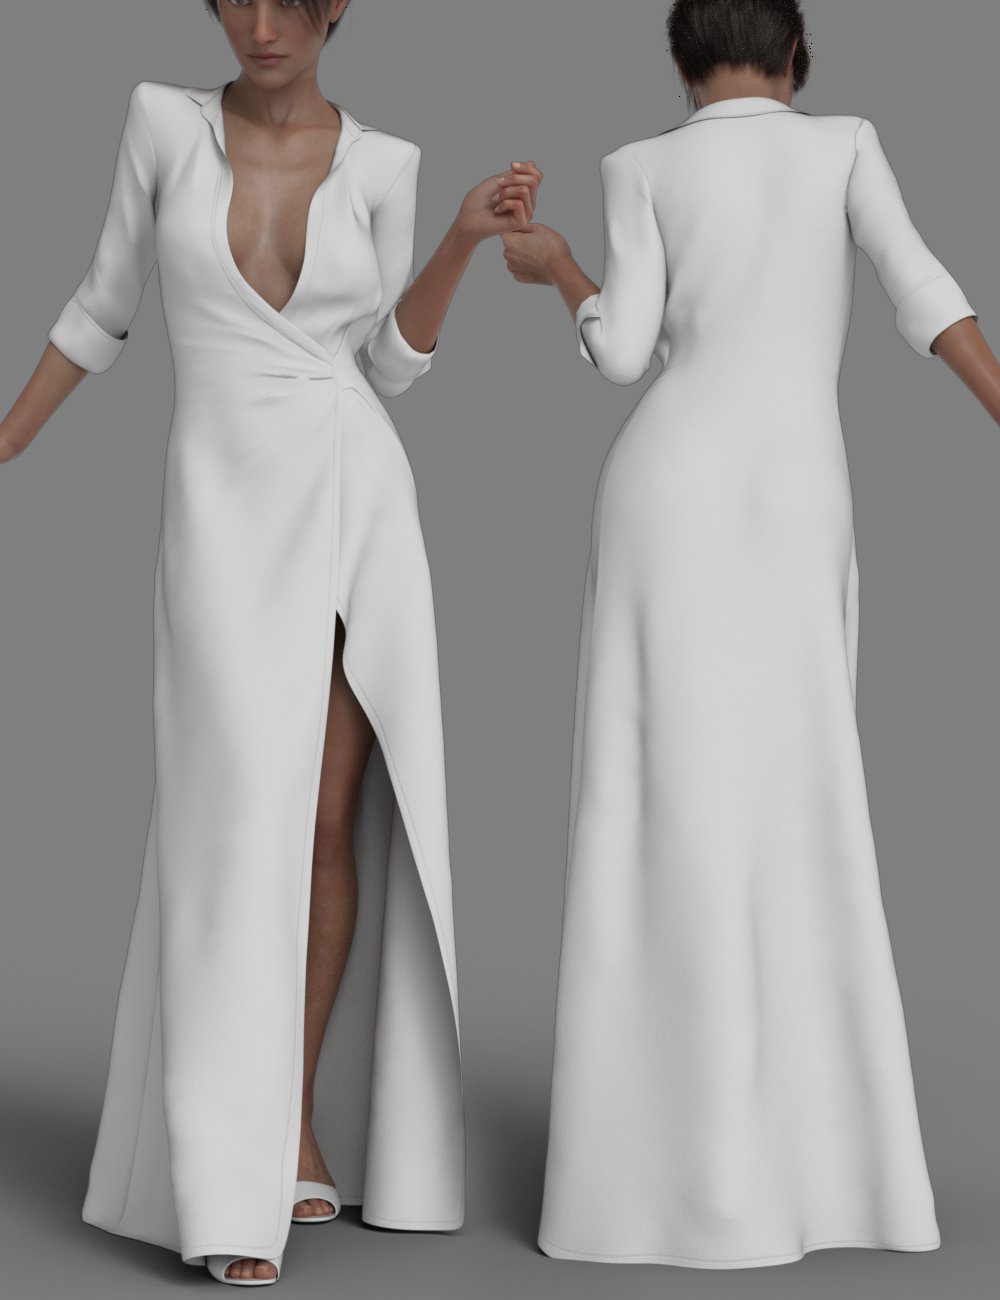 dForce Tres Chic Outfit for Genesis 8 and 8.1 Females by: Nikisatez, 3D Models by Daz 3D